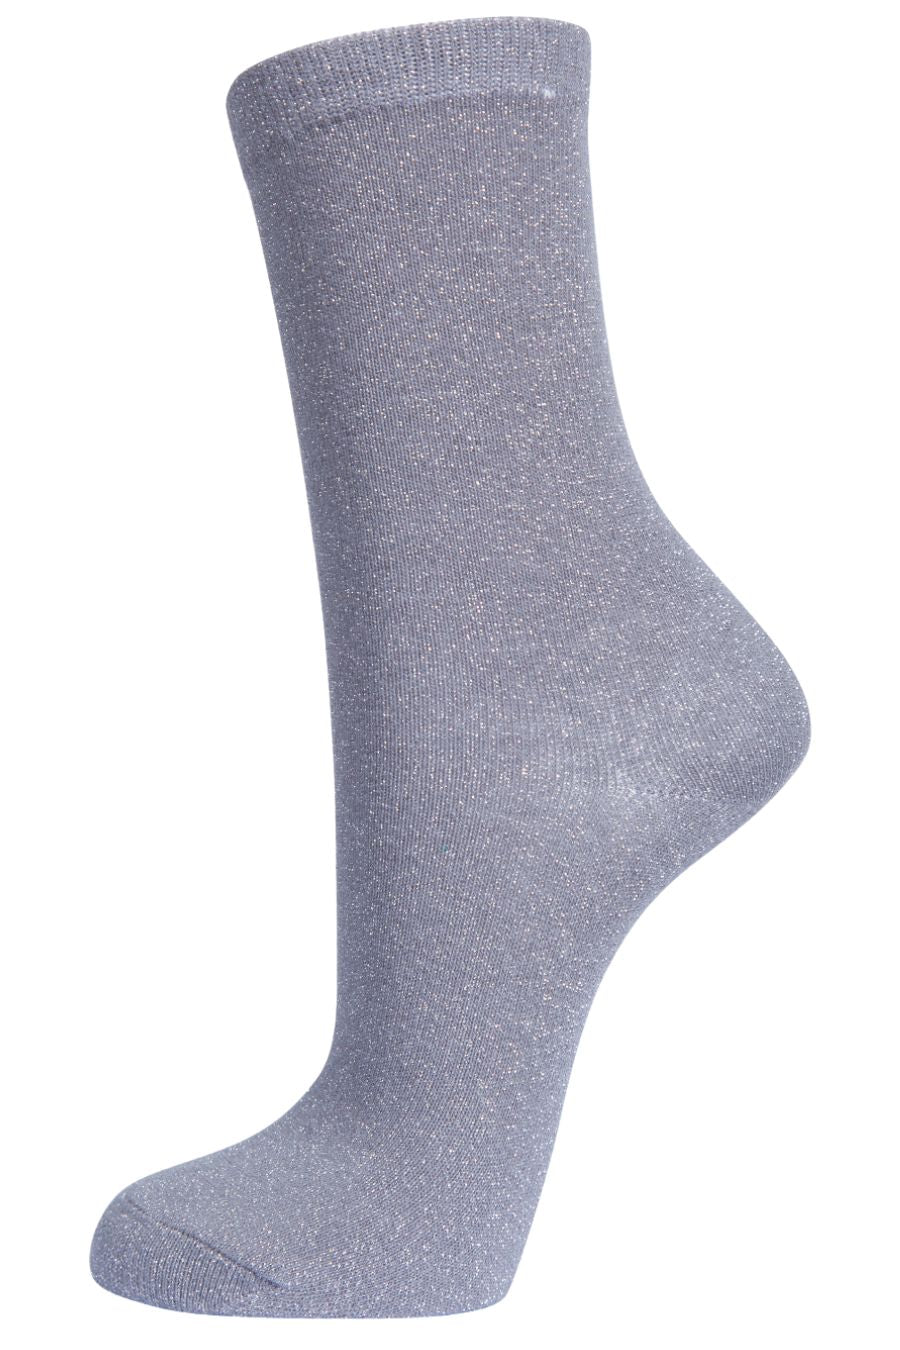 grey ankle socks with an all over silver glitter sparkle